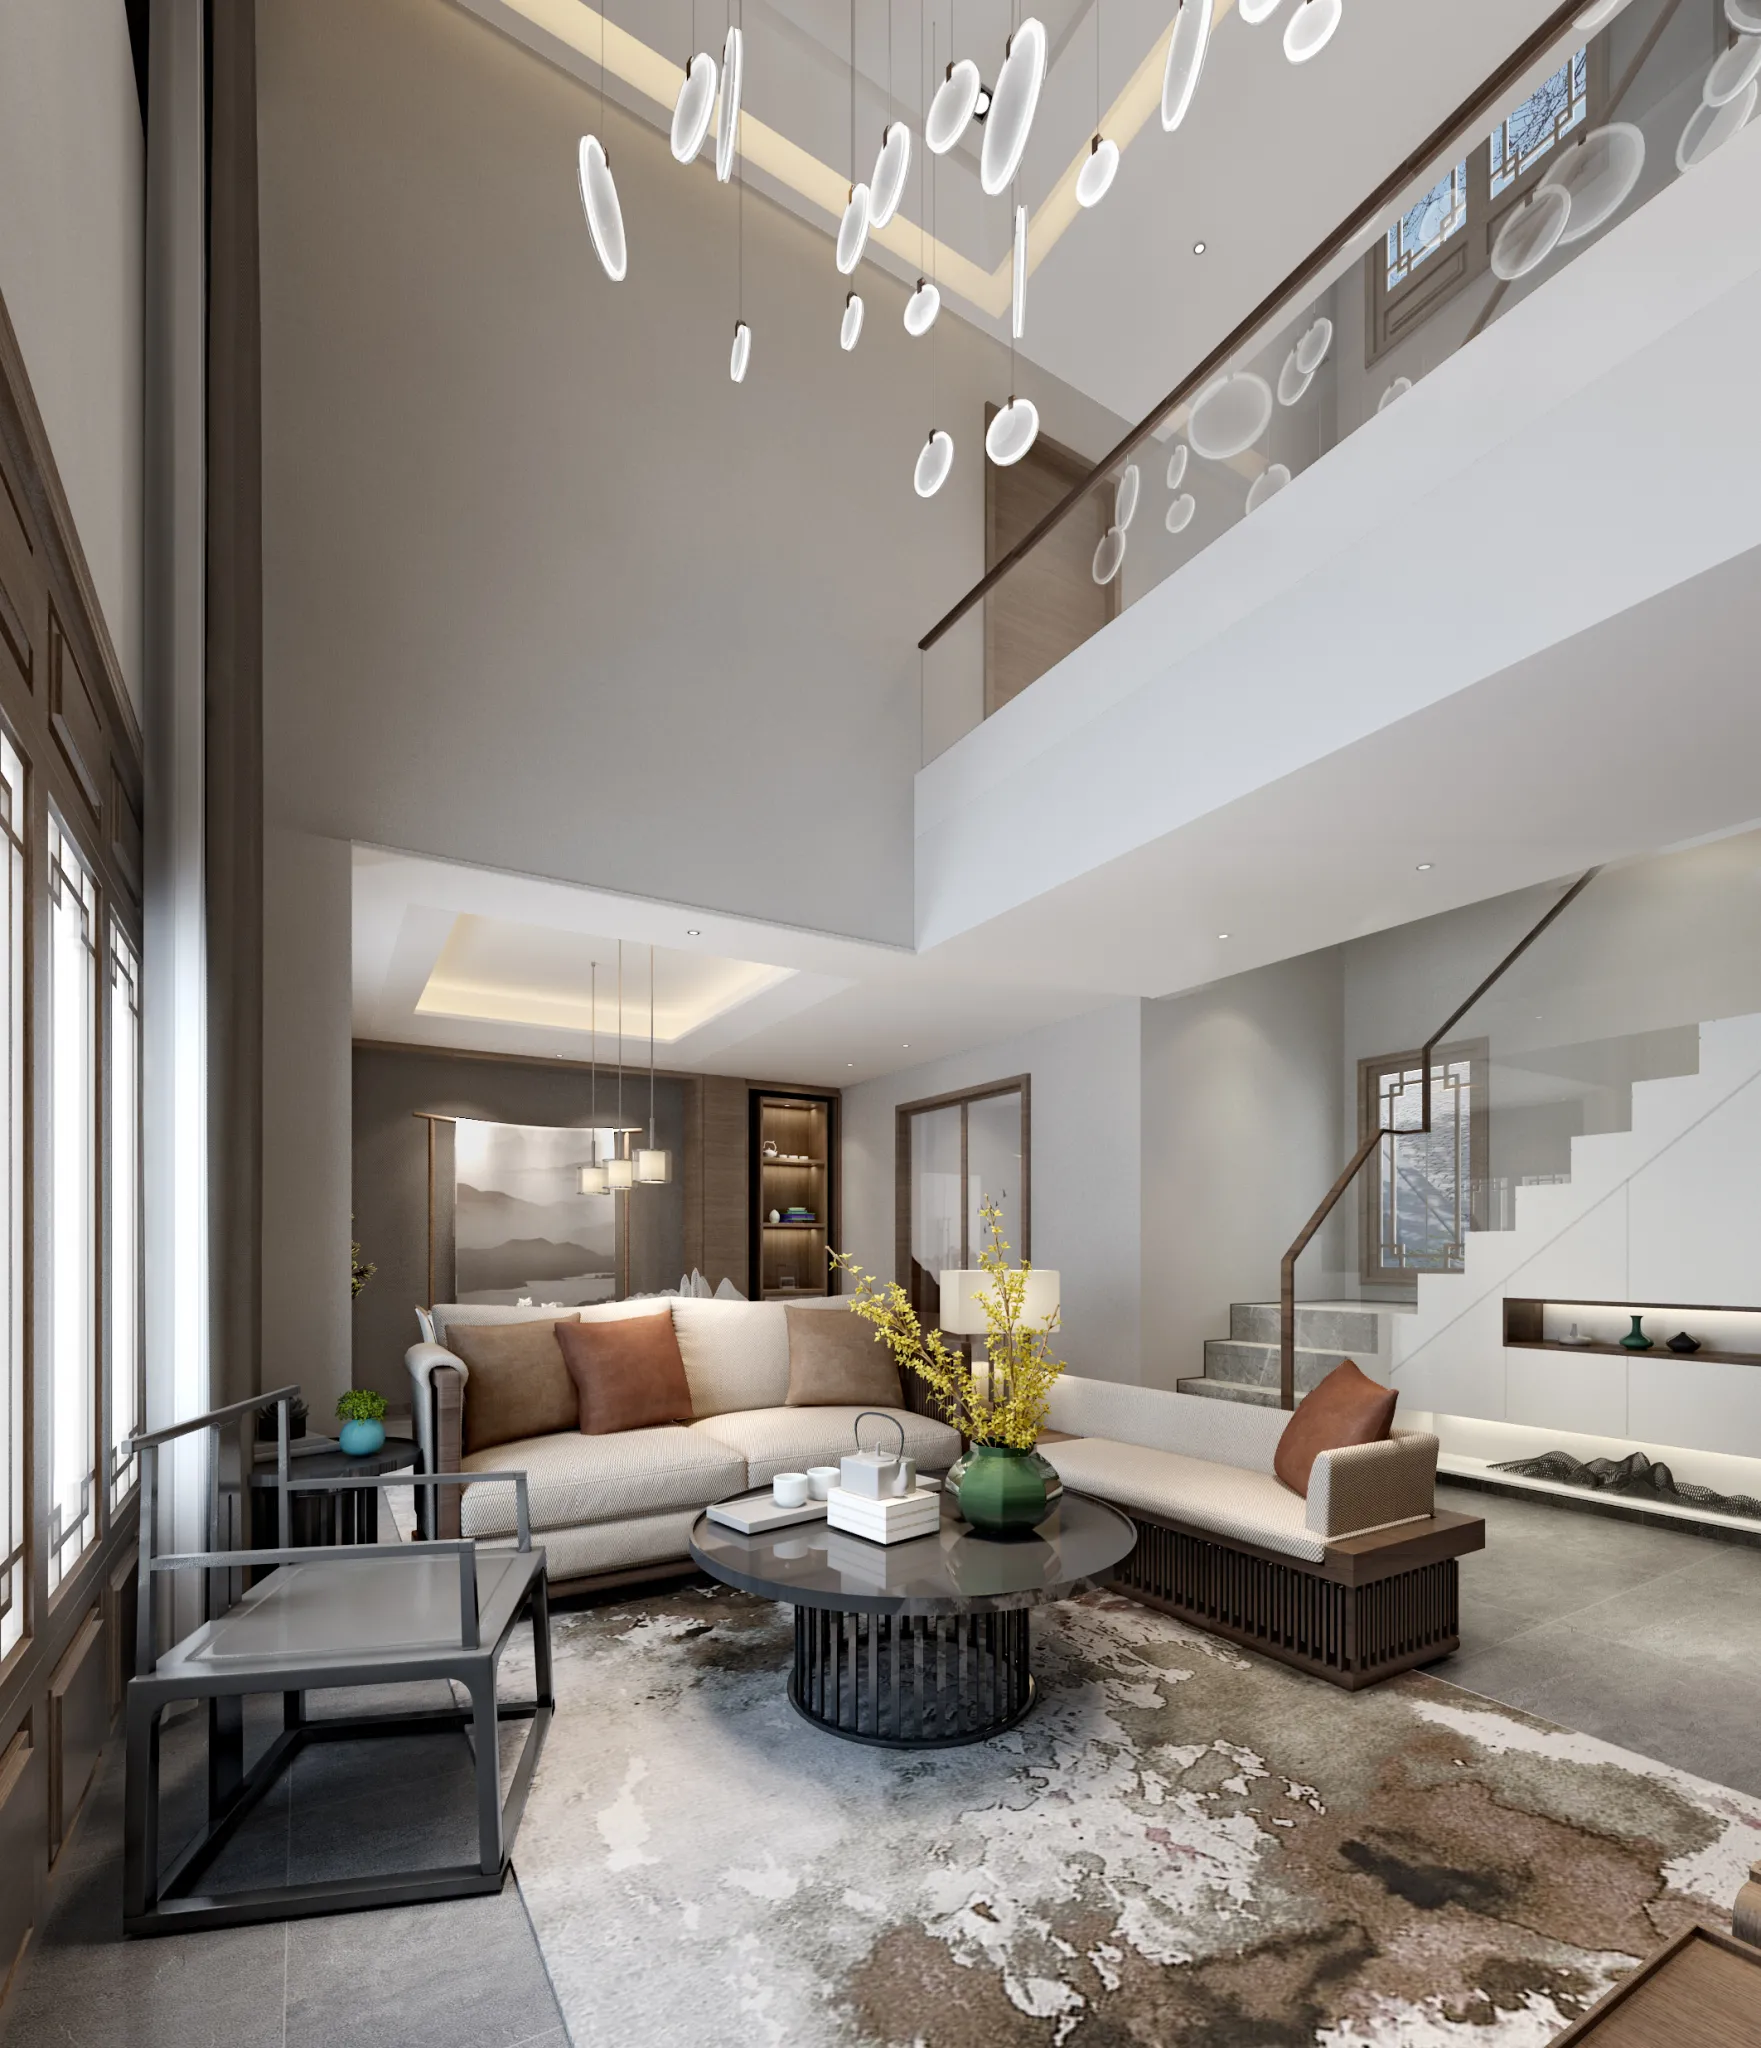 DESMOD INTERIOR 2021 (VRAY) – 4. LIVING ROOM – CHINESE – 088